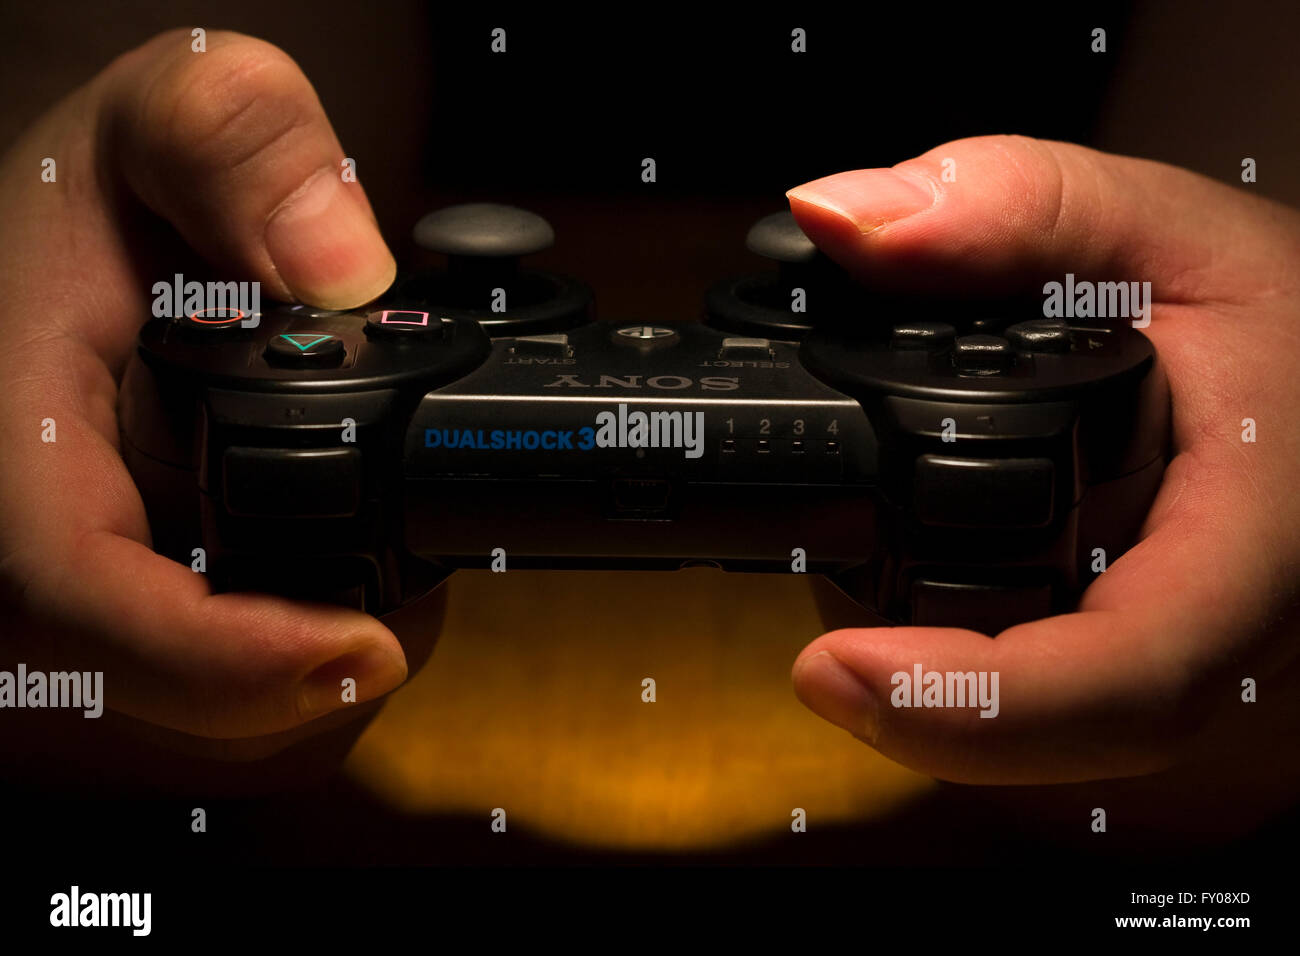 Two hands holding a wireless SONY Playstation Dual Shock 3 Controller whilst the thumbs are pressing the buttons Stock Photo